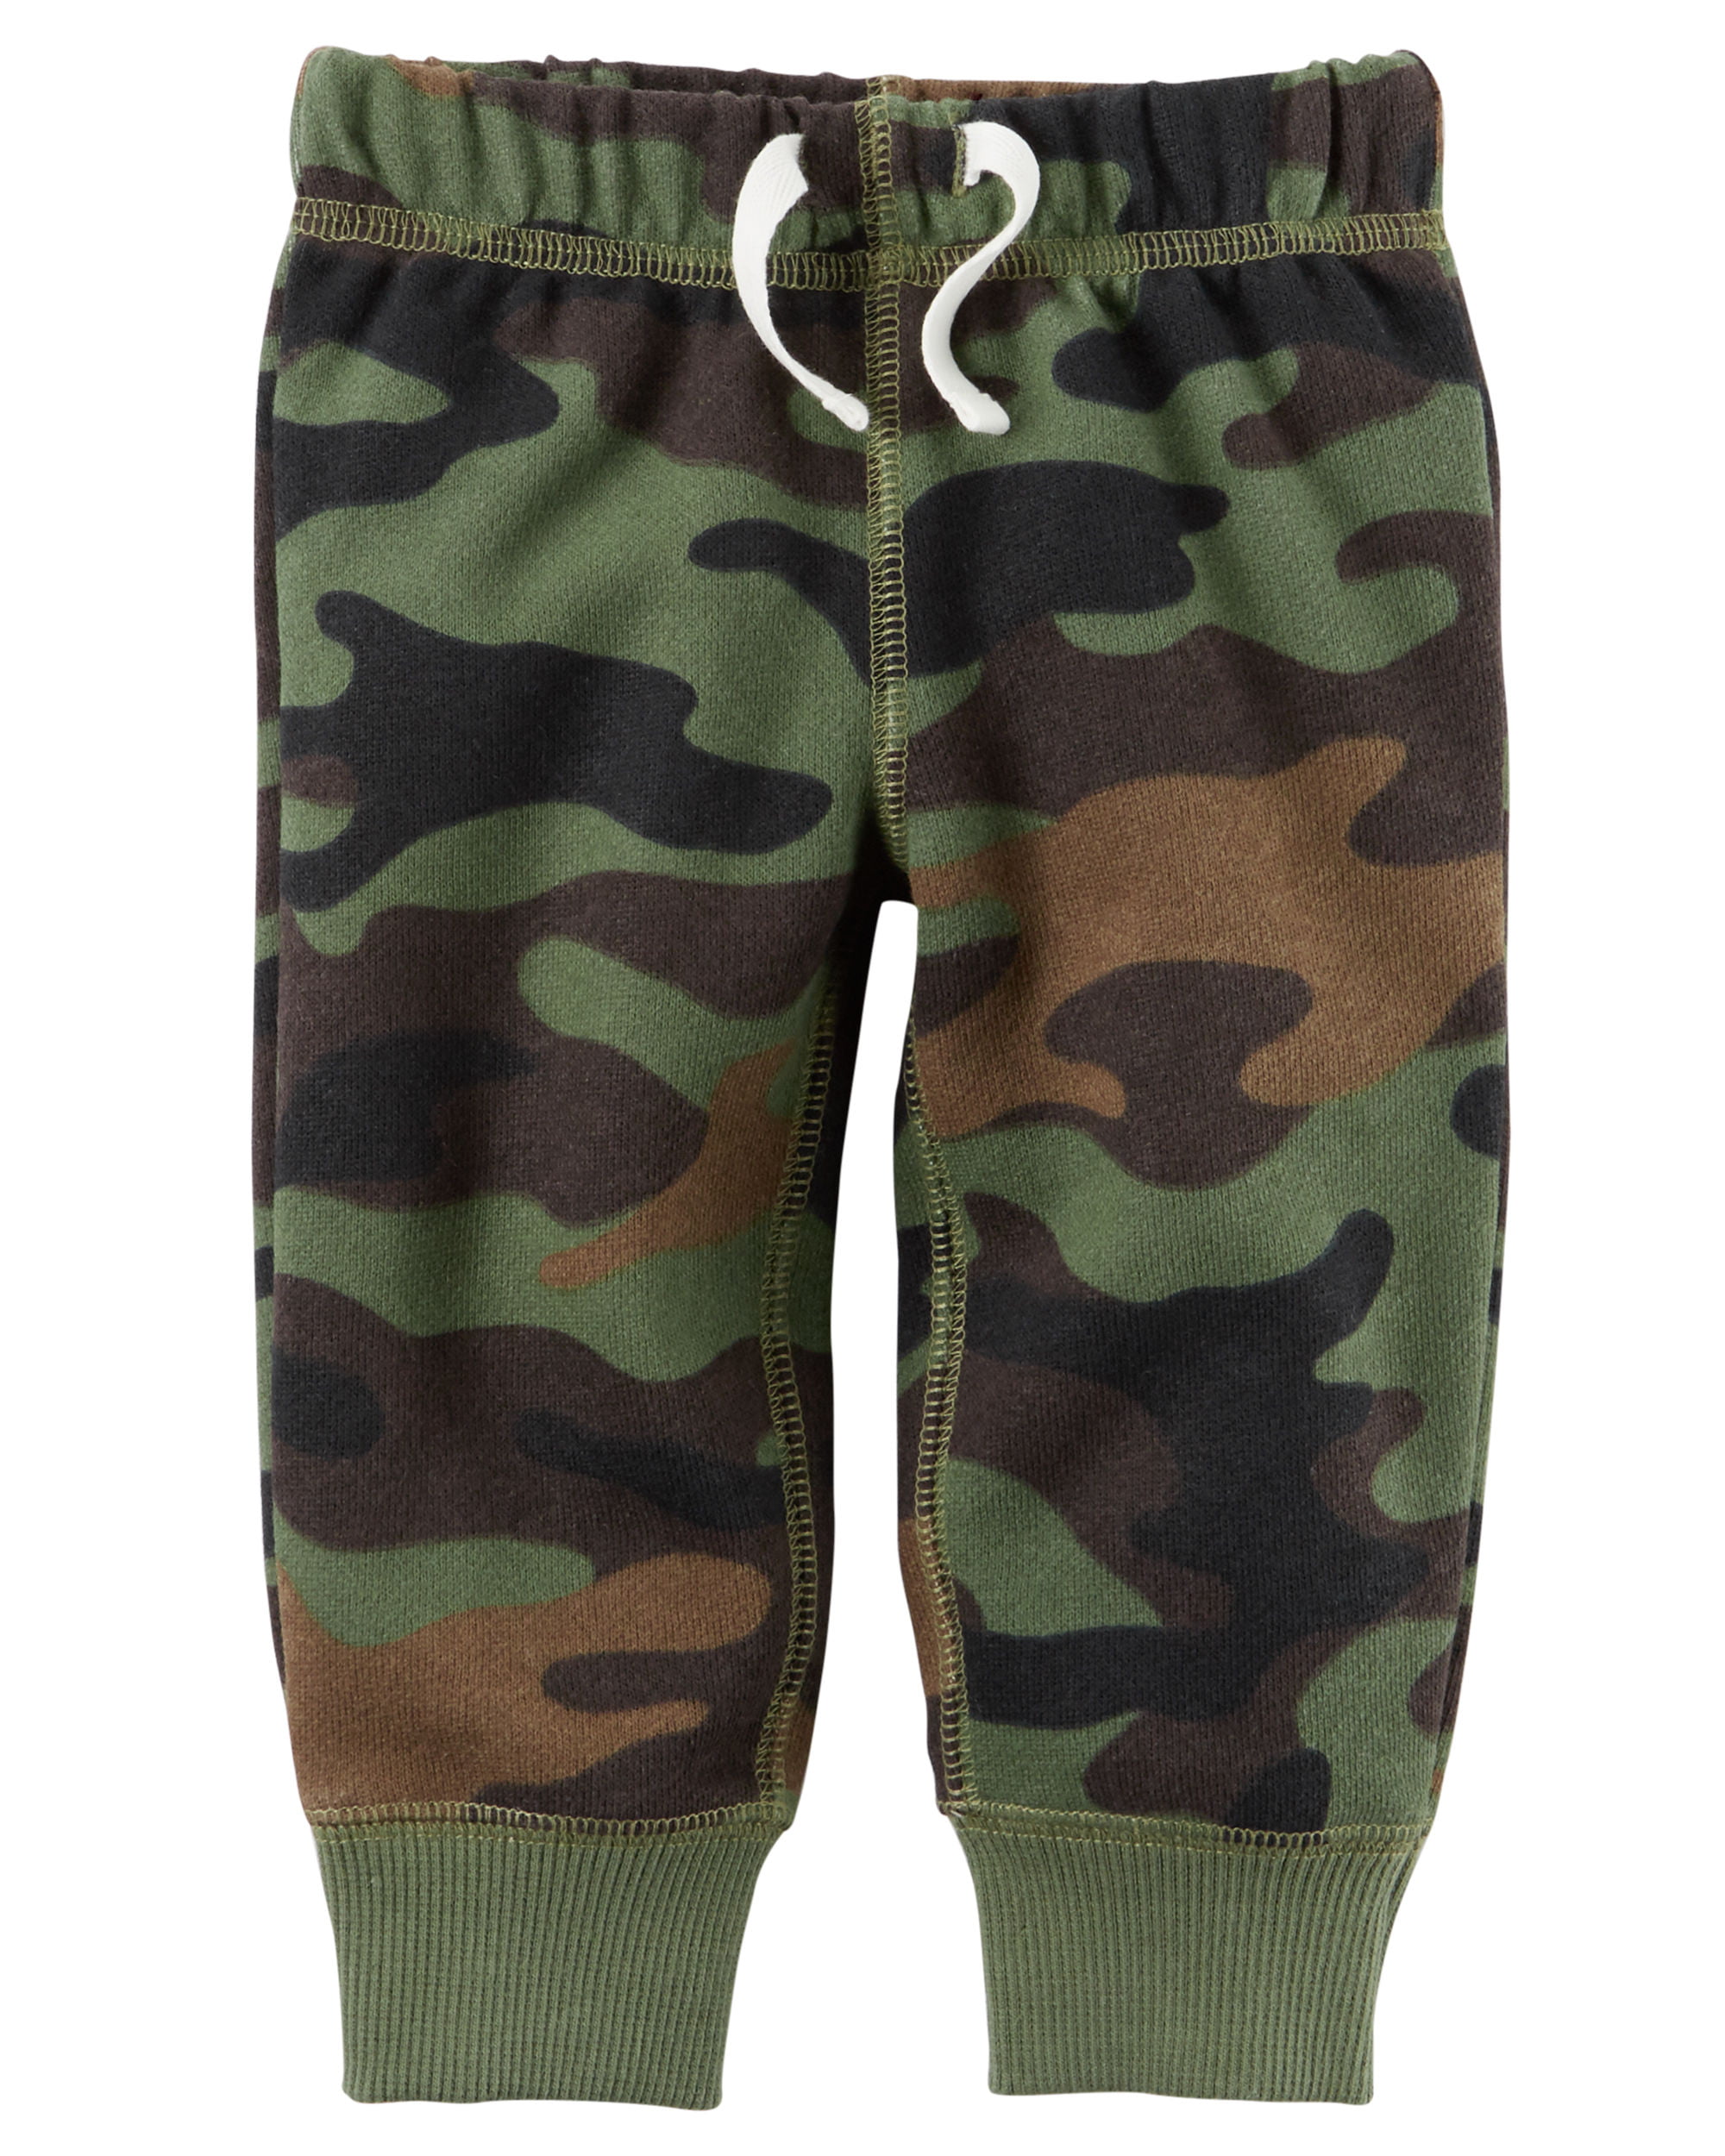 Carters Boys Green Camo Pull On Jersey Lined Pants 12 Months 